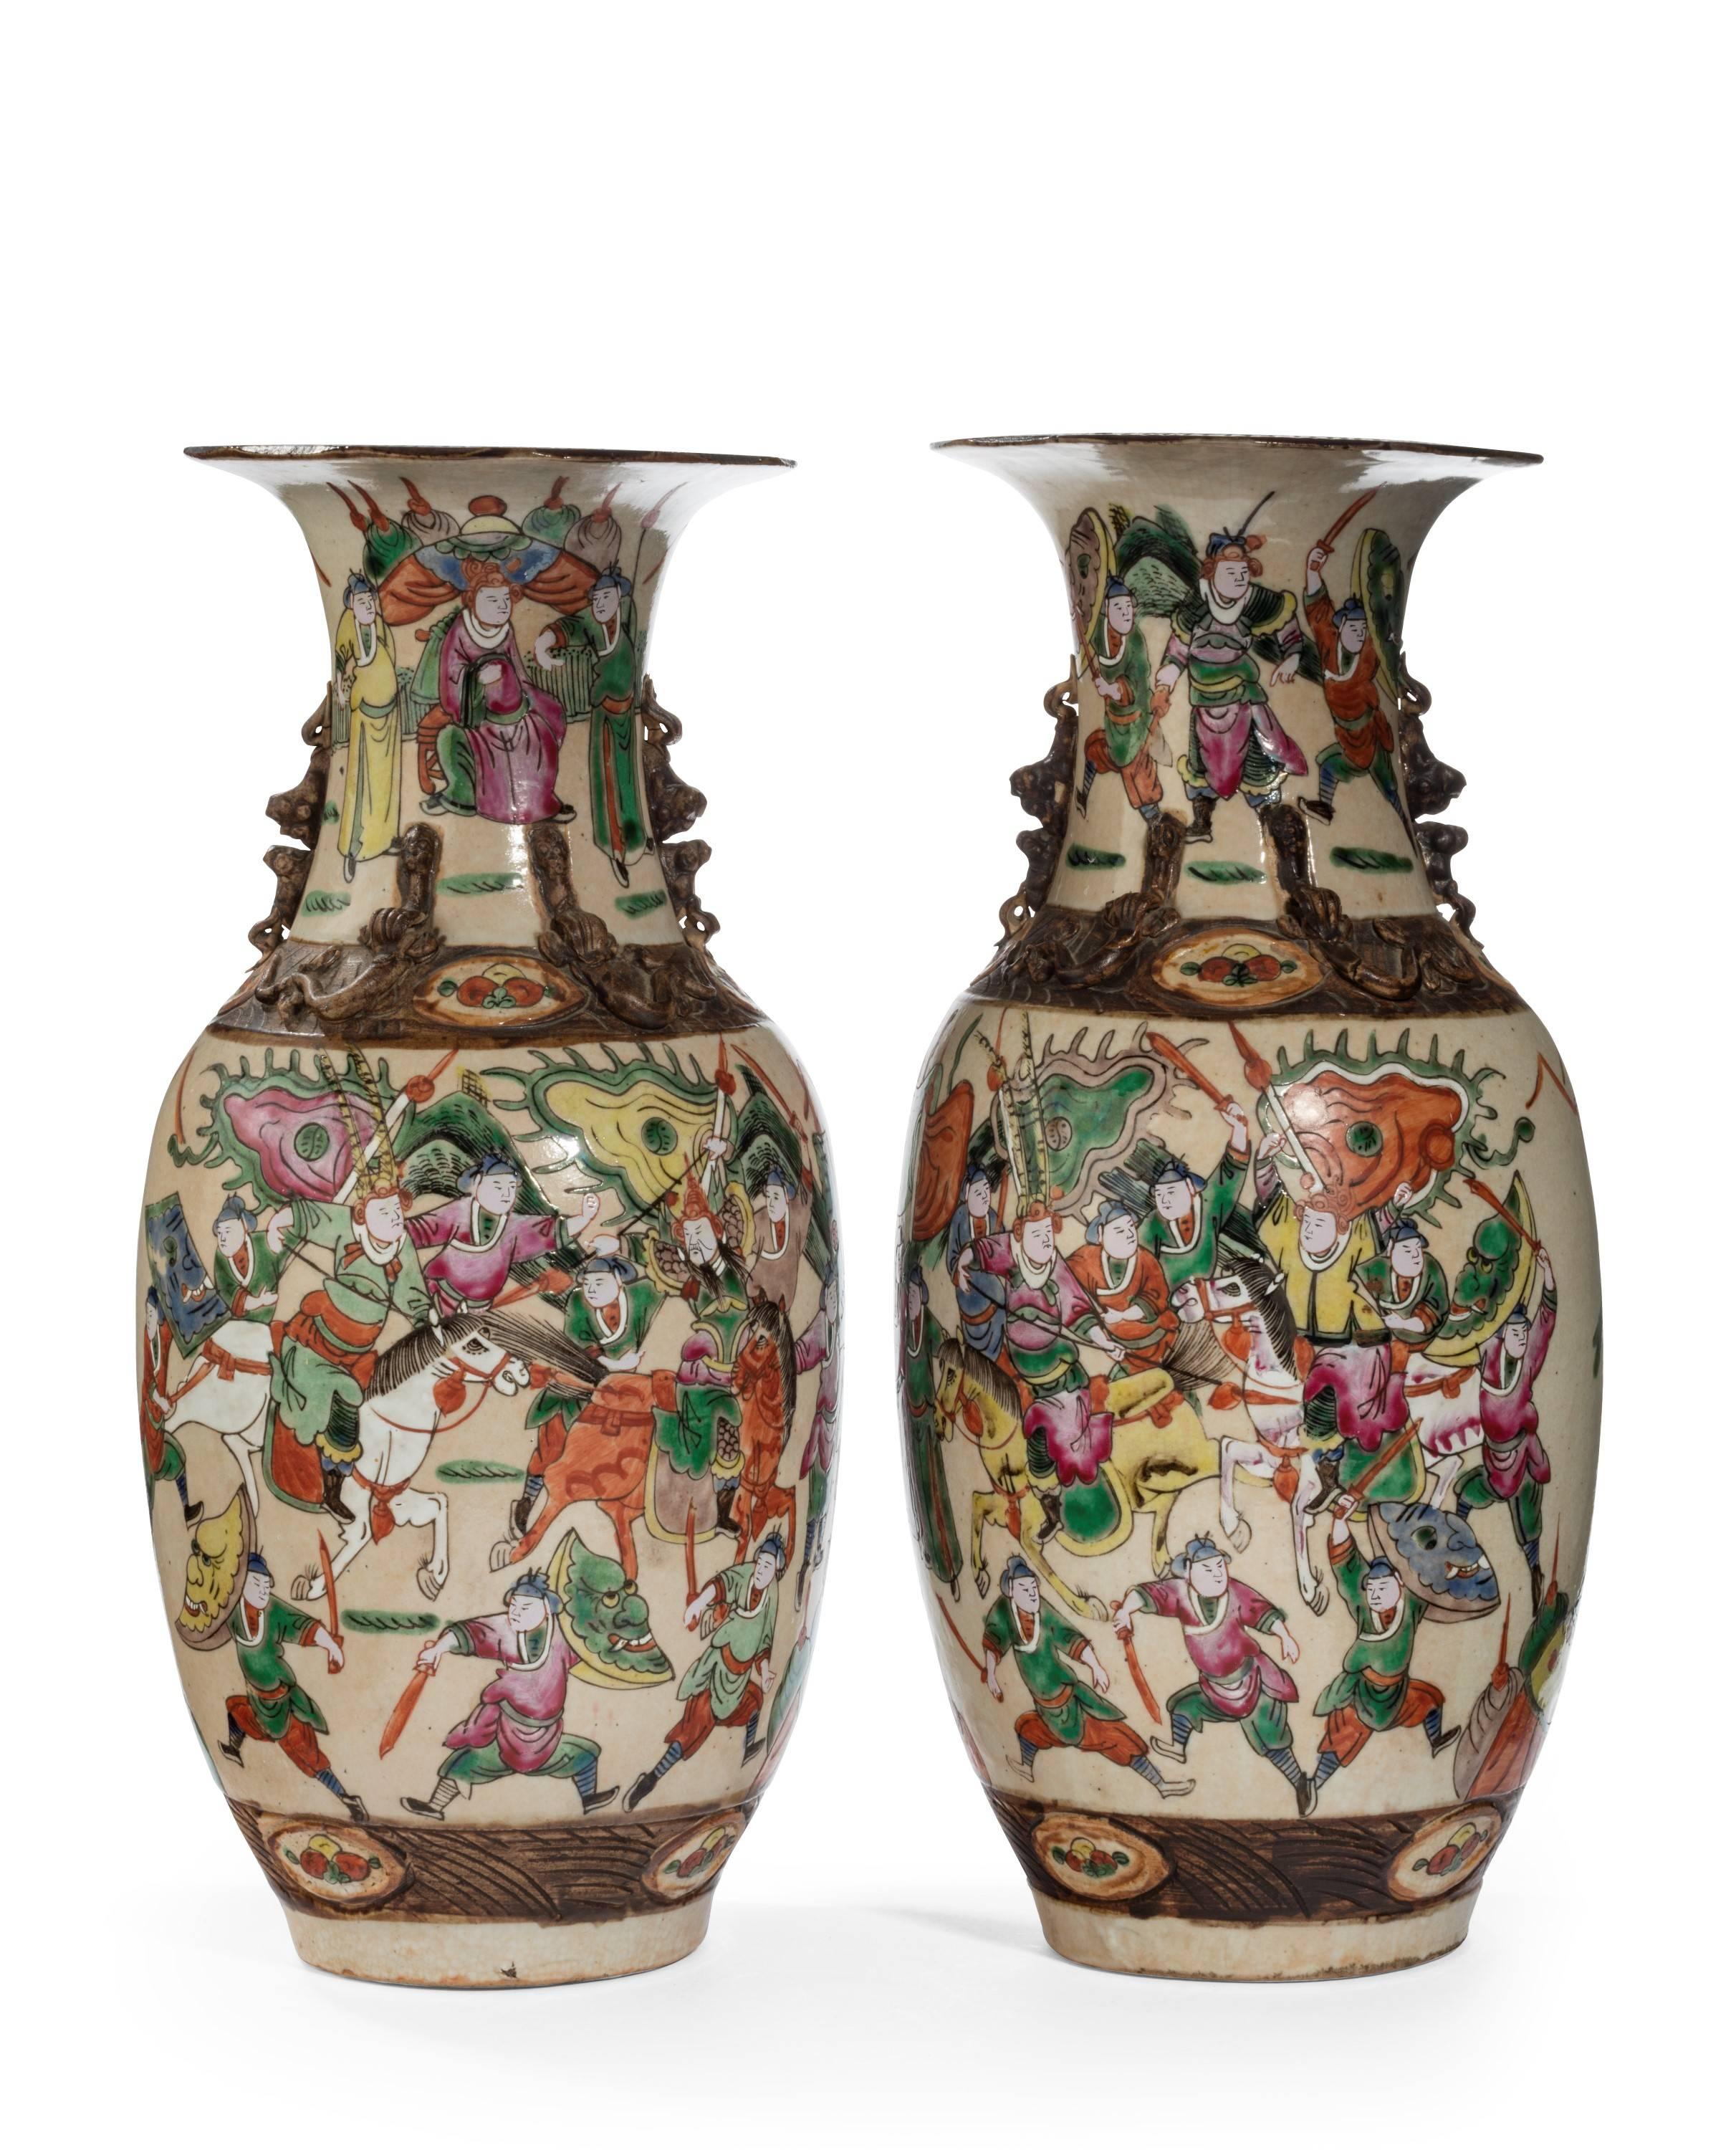 A good pair of Chinese figural polychrome crackleware vases. The upper section with animals and figurines in relief. Excellent overall condition.